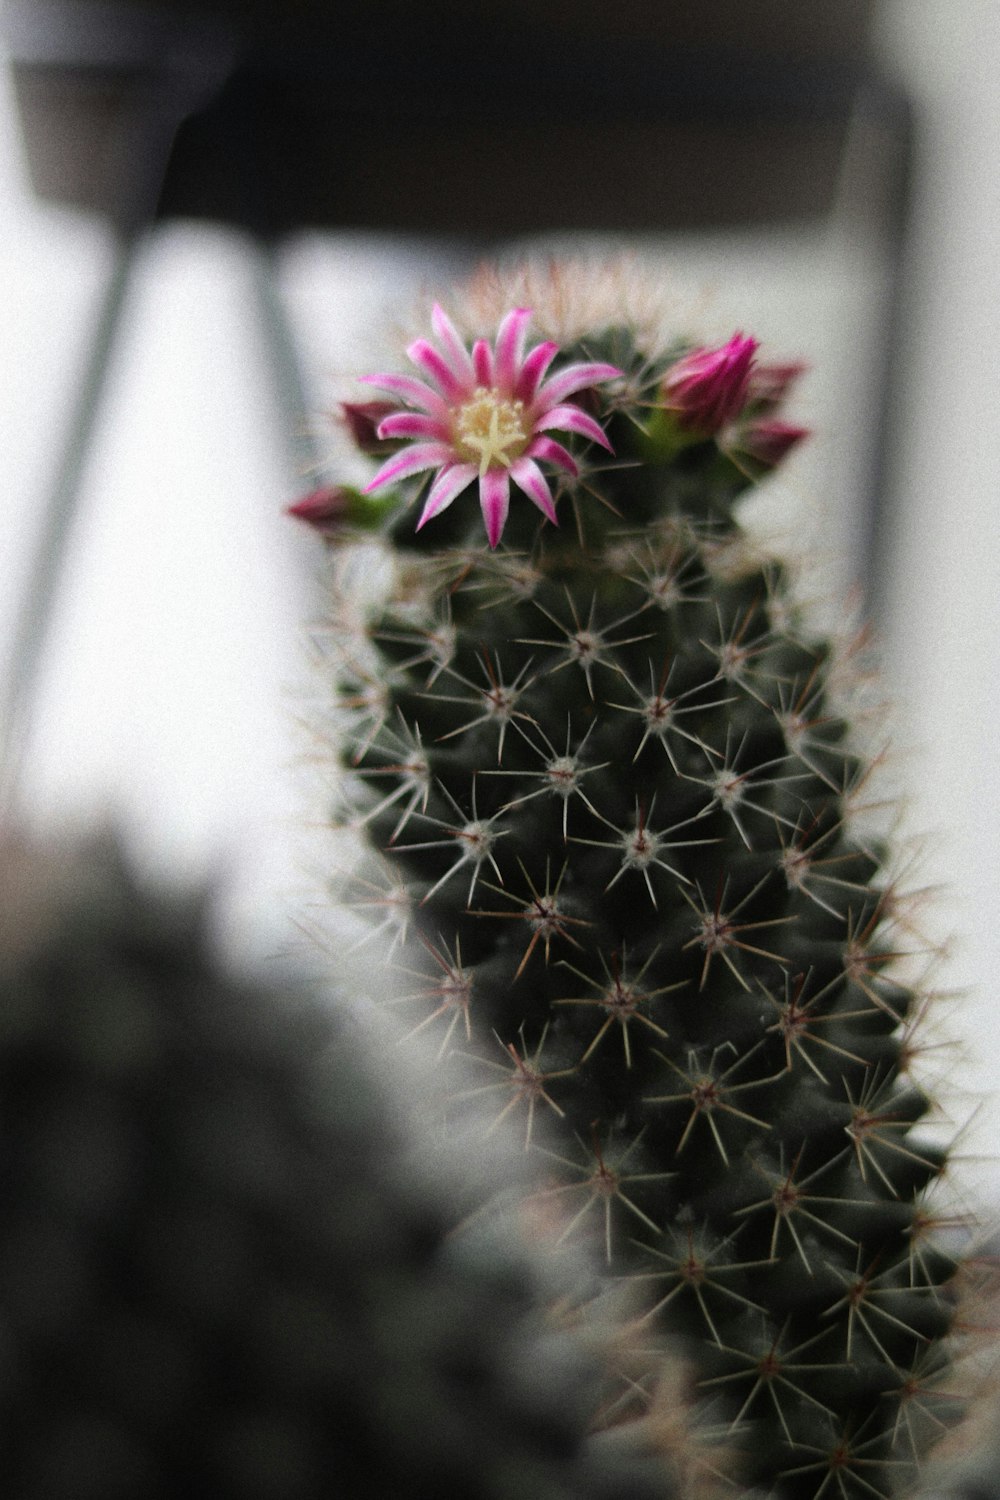 green and pink cactus plant